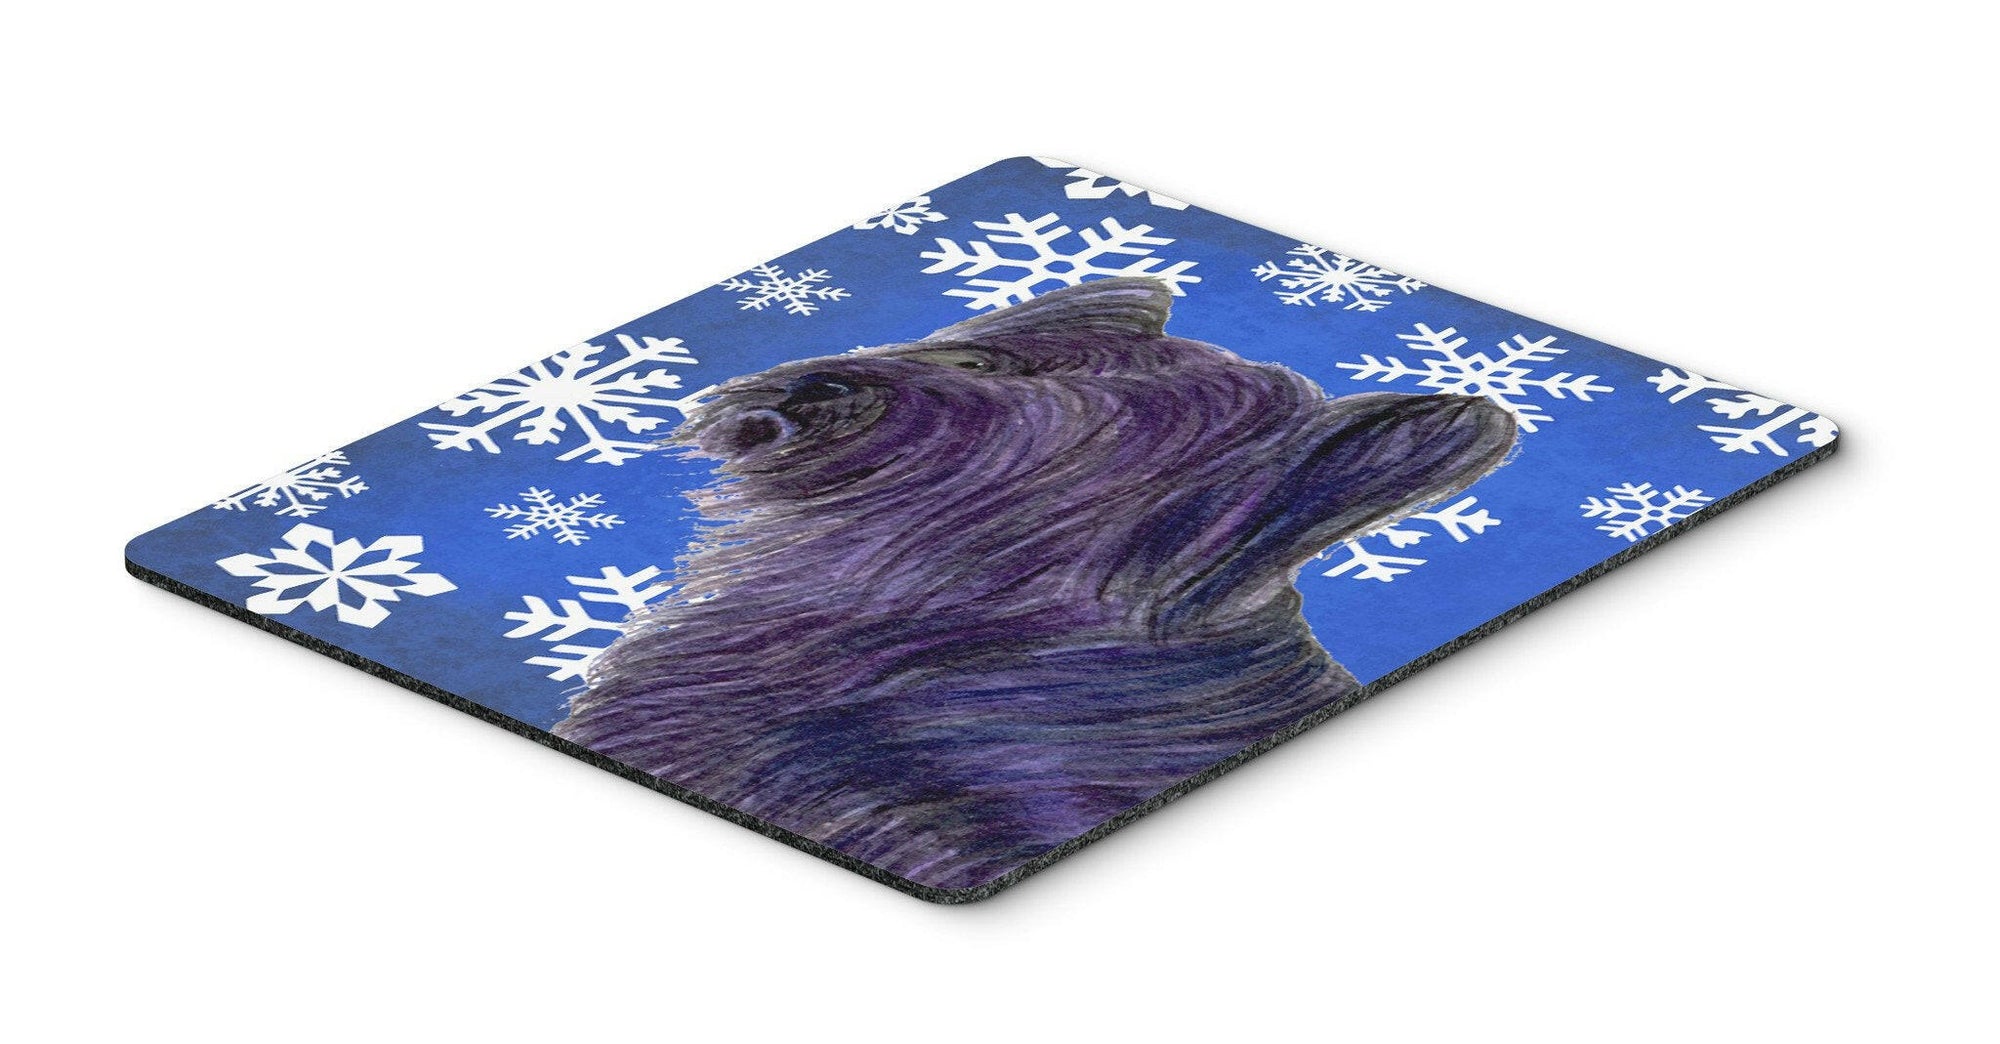 Skye Terrier Winter Snowflakes Holiday Mouse Pad, Hot Pad or Trivet by Caroline's Treasures